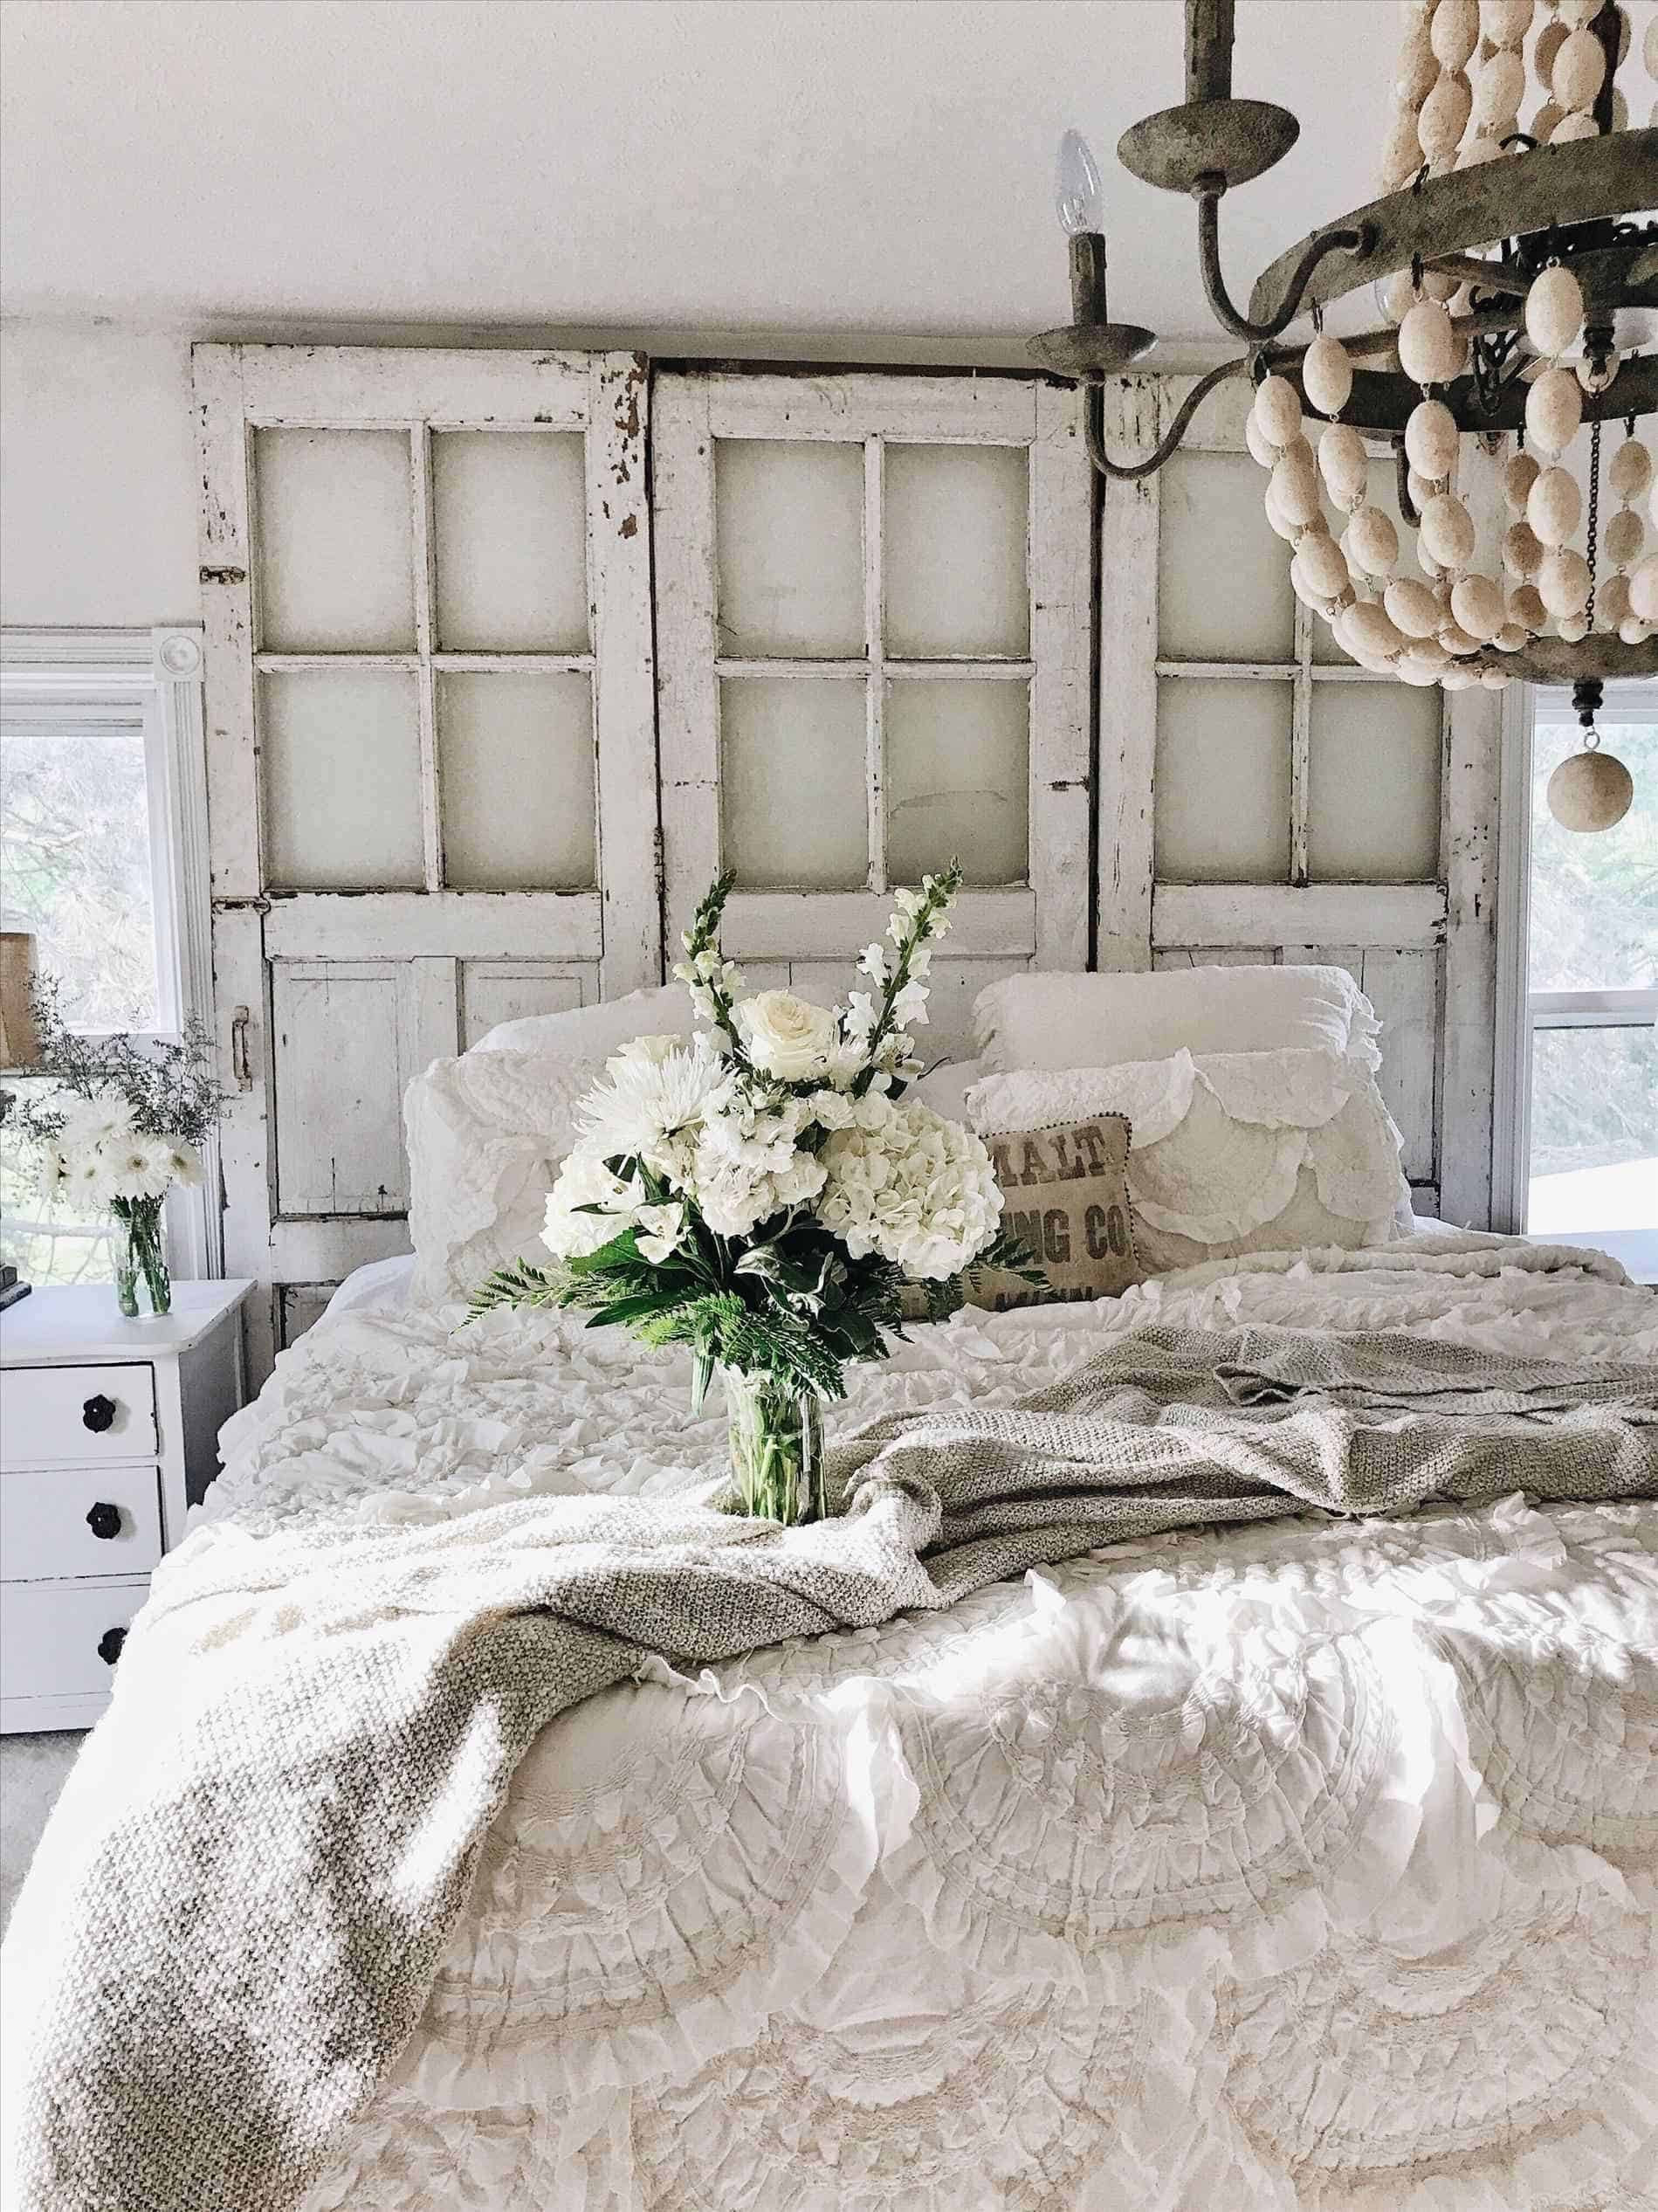 Shabby Chic Bedroom Unique Beautiful Shabby Chic Bedroom Ideas to Take In Consideration